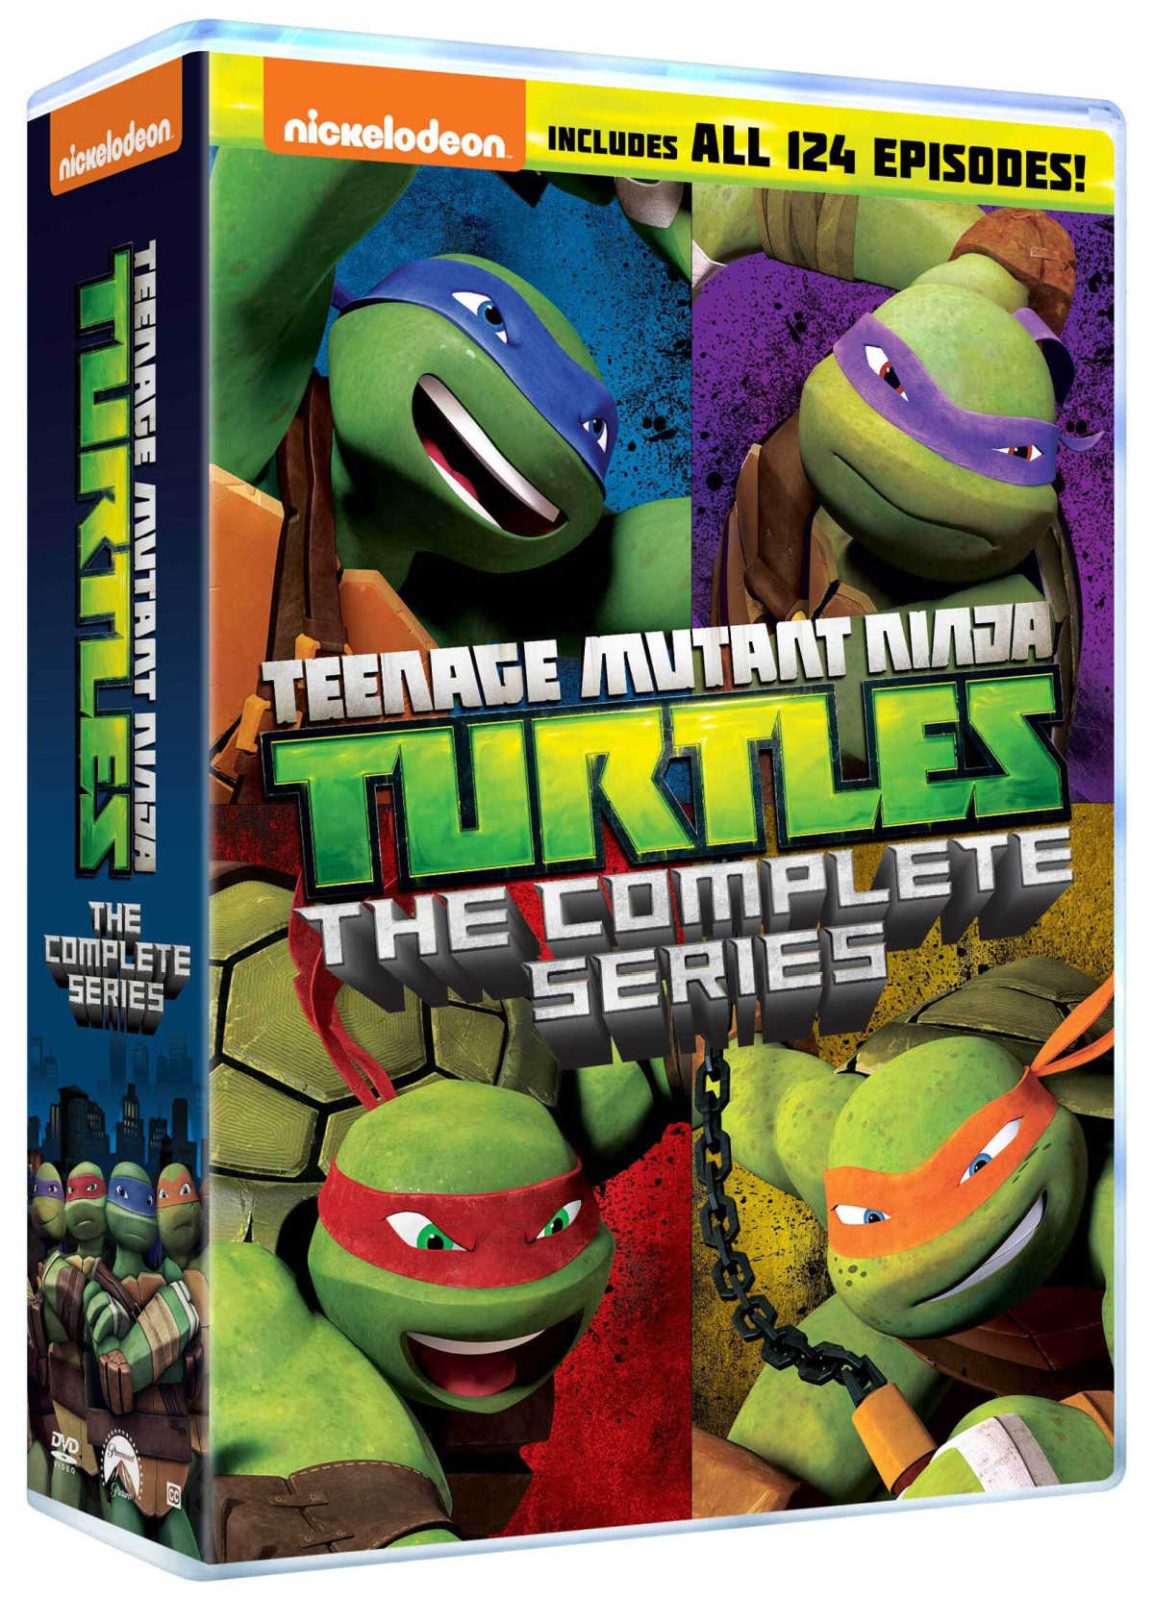 The all new Teenage Mutant Ninja Turtles Complete Series DVD set is a must-have for collectors and fans of all ages. 